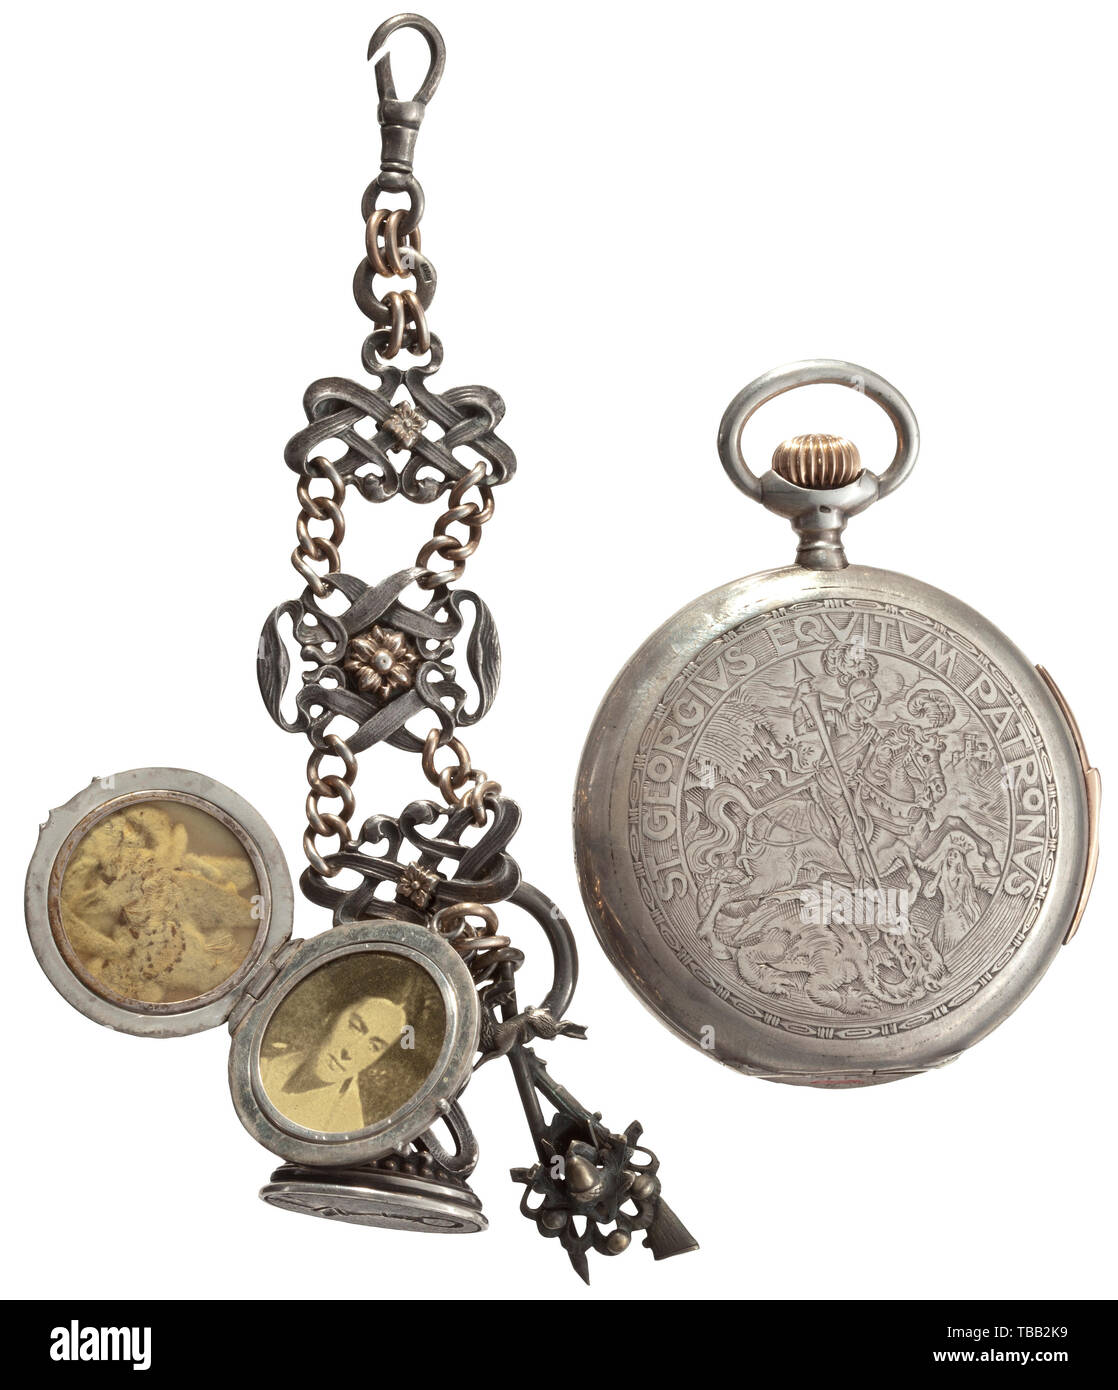 Hermann Göring - a presentation pocket watch from Carin Göring, 1924 Silver watch with hunter case from the workshop of Gustav Schulze, court watchmaker in Munich. High-quality, movement mounted with rubies, with hour repeater. On the front a finely engraved depiction of St.George, one of St. Hubert on the back, each surrounded by an inscription in Latin, the presentation inscription around the St.Hubertus scene saying: 'To my beloved Hermann, Waidmannsheil (Hunter's greeting) always from his Carin, Innsbruck 12 January 1924'. Mark of fineness for silver. Diameter 60 mm. Th, Editorial-Use-Only Stock Photo